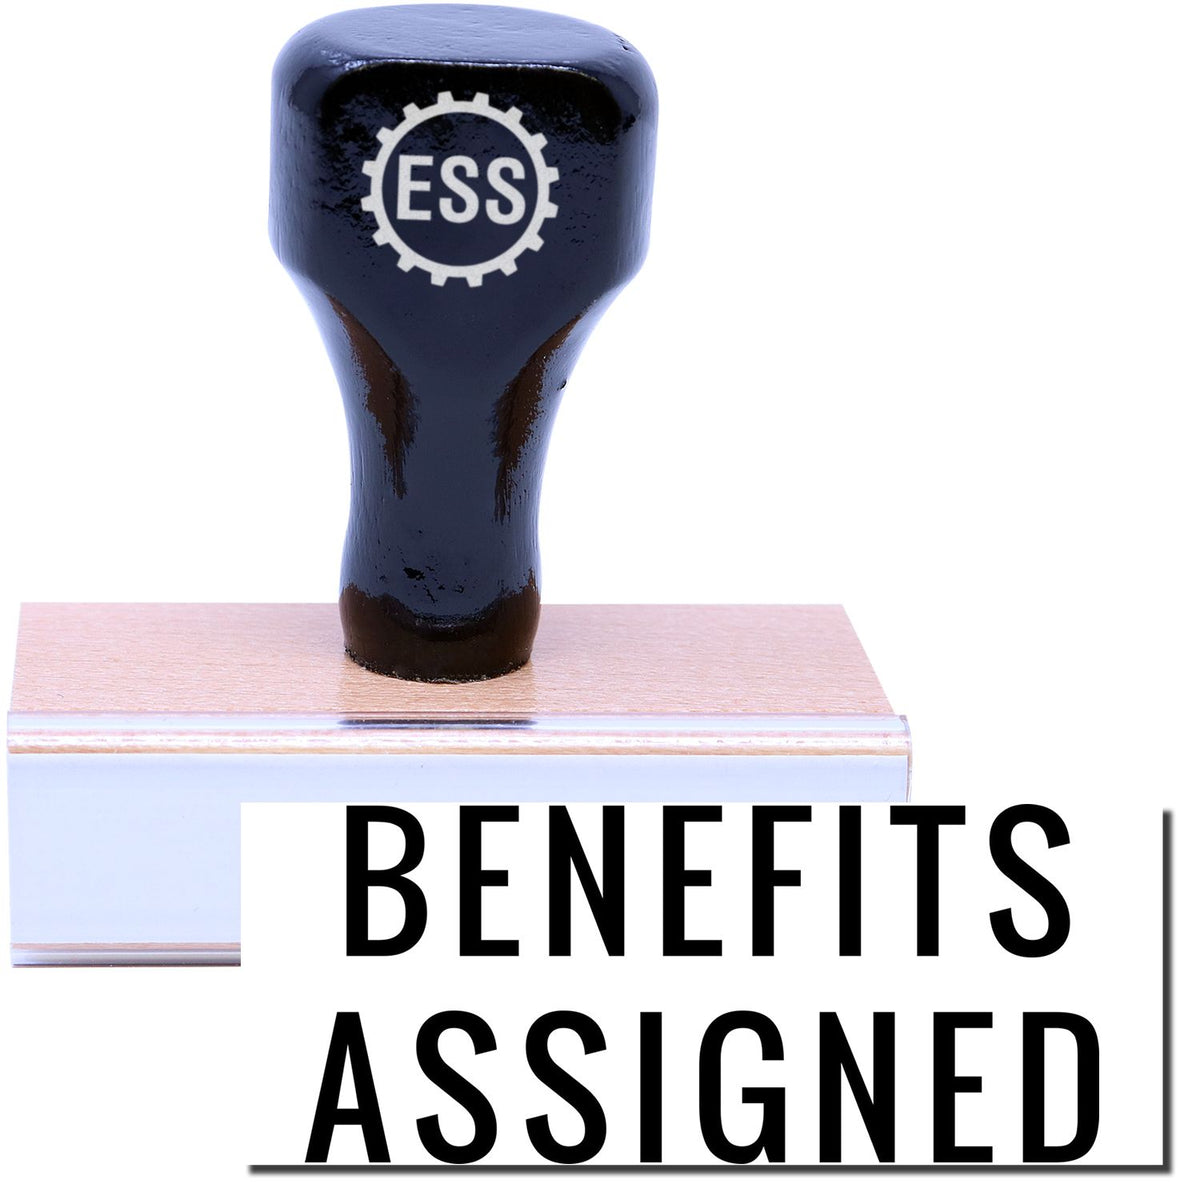 A stock office rubber stamp with a stamped image showing how the text &quot;BENEFITS ASSIGNED&quot; in a large narrow font is displayed after stamping.